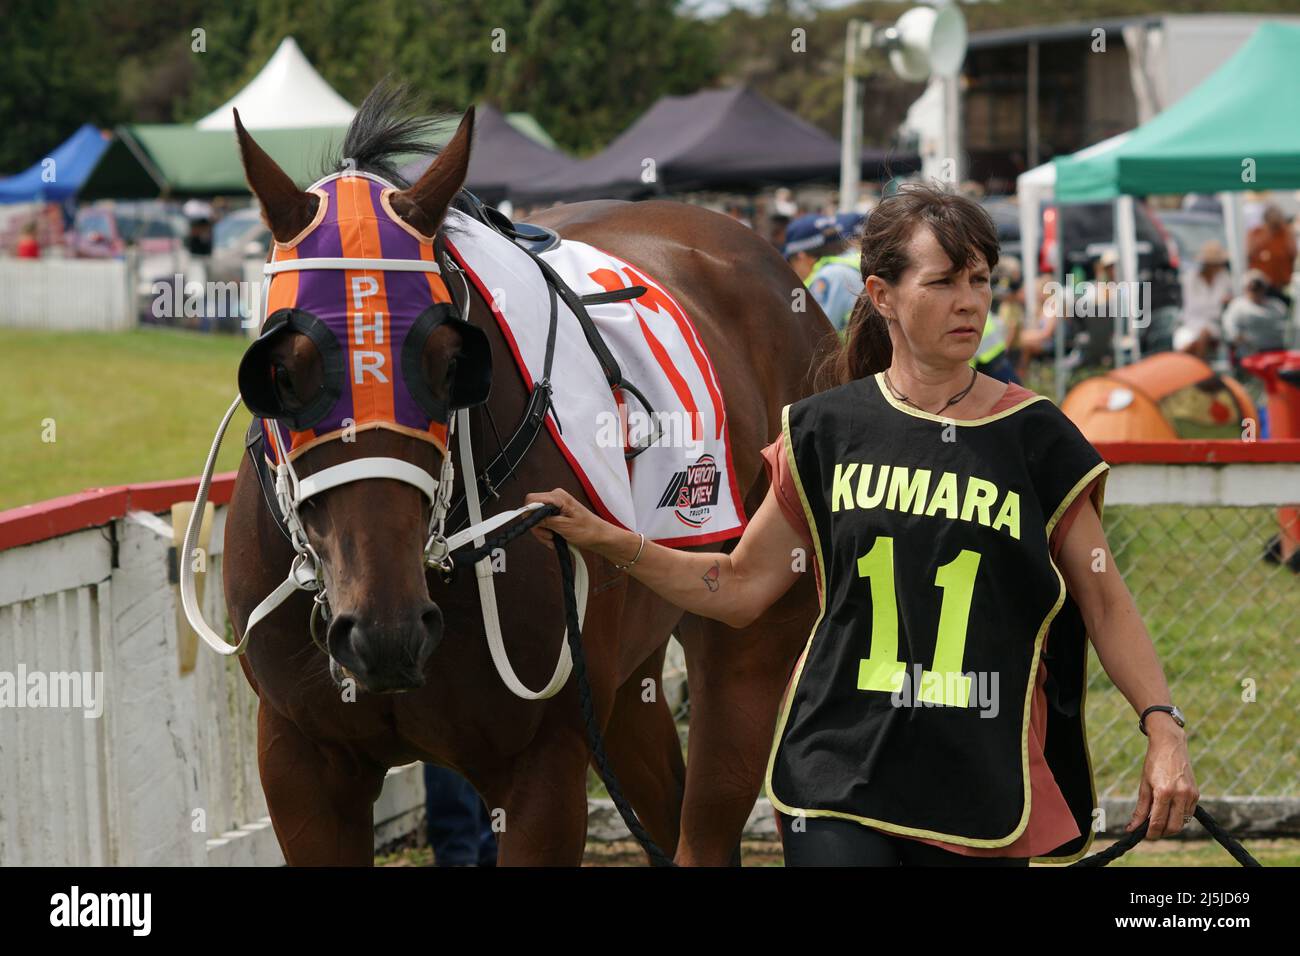 KUMARA, NEW ZEALAND, JANUARY 8, 2022; A trainer warms up her horse before a race at the Gold Nuggets competition at the Kumara Race Track, January 8, Stock Photo